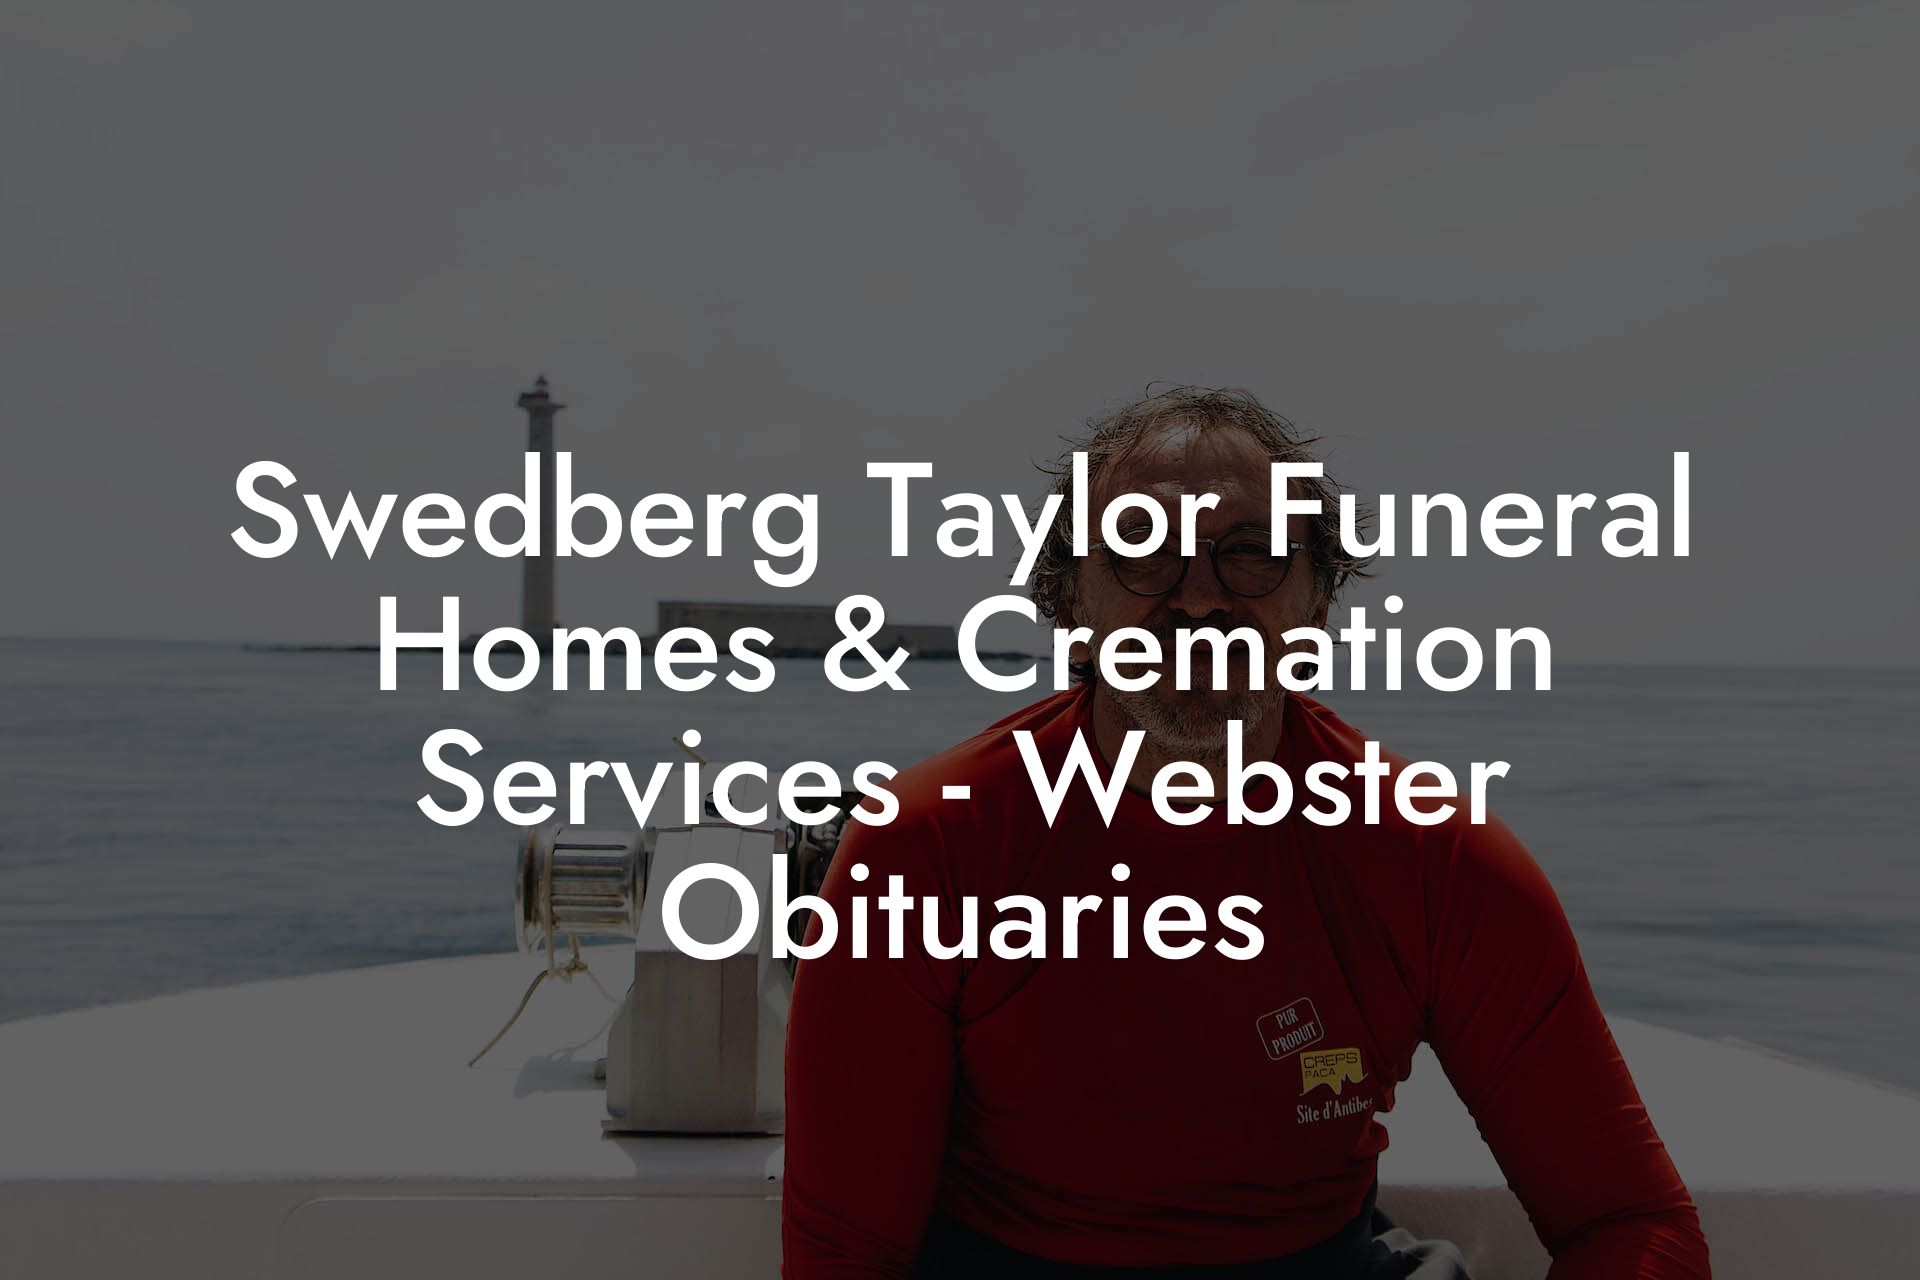 Swedberg Taylor Funeral Homes & Cremation Services - Webster Obituaries